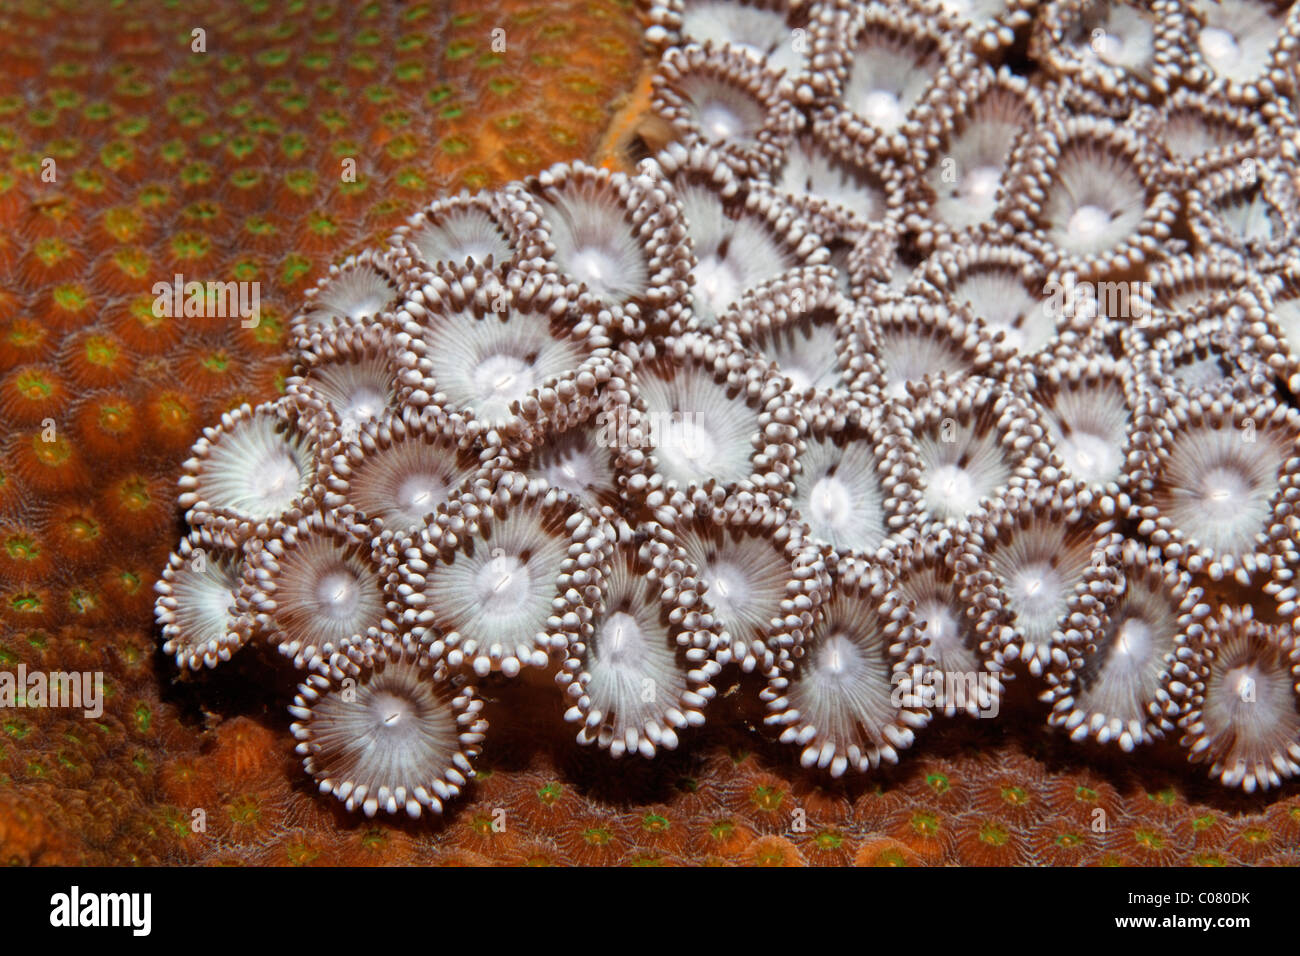 Mat zoanthid (Zoanthus pulchellus), growing on stony coral, Saint Lucia, St. Lucia Island, Windward Islands, Lesser Antilles Stock Photo